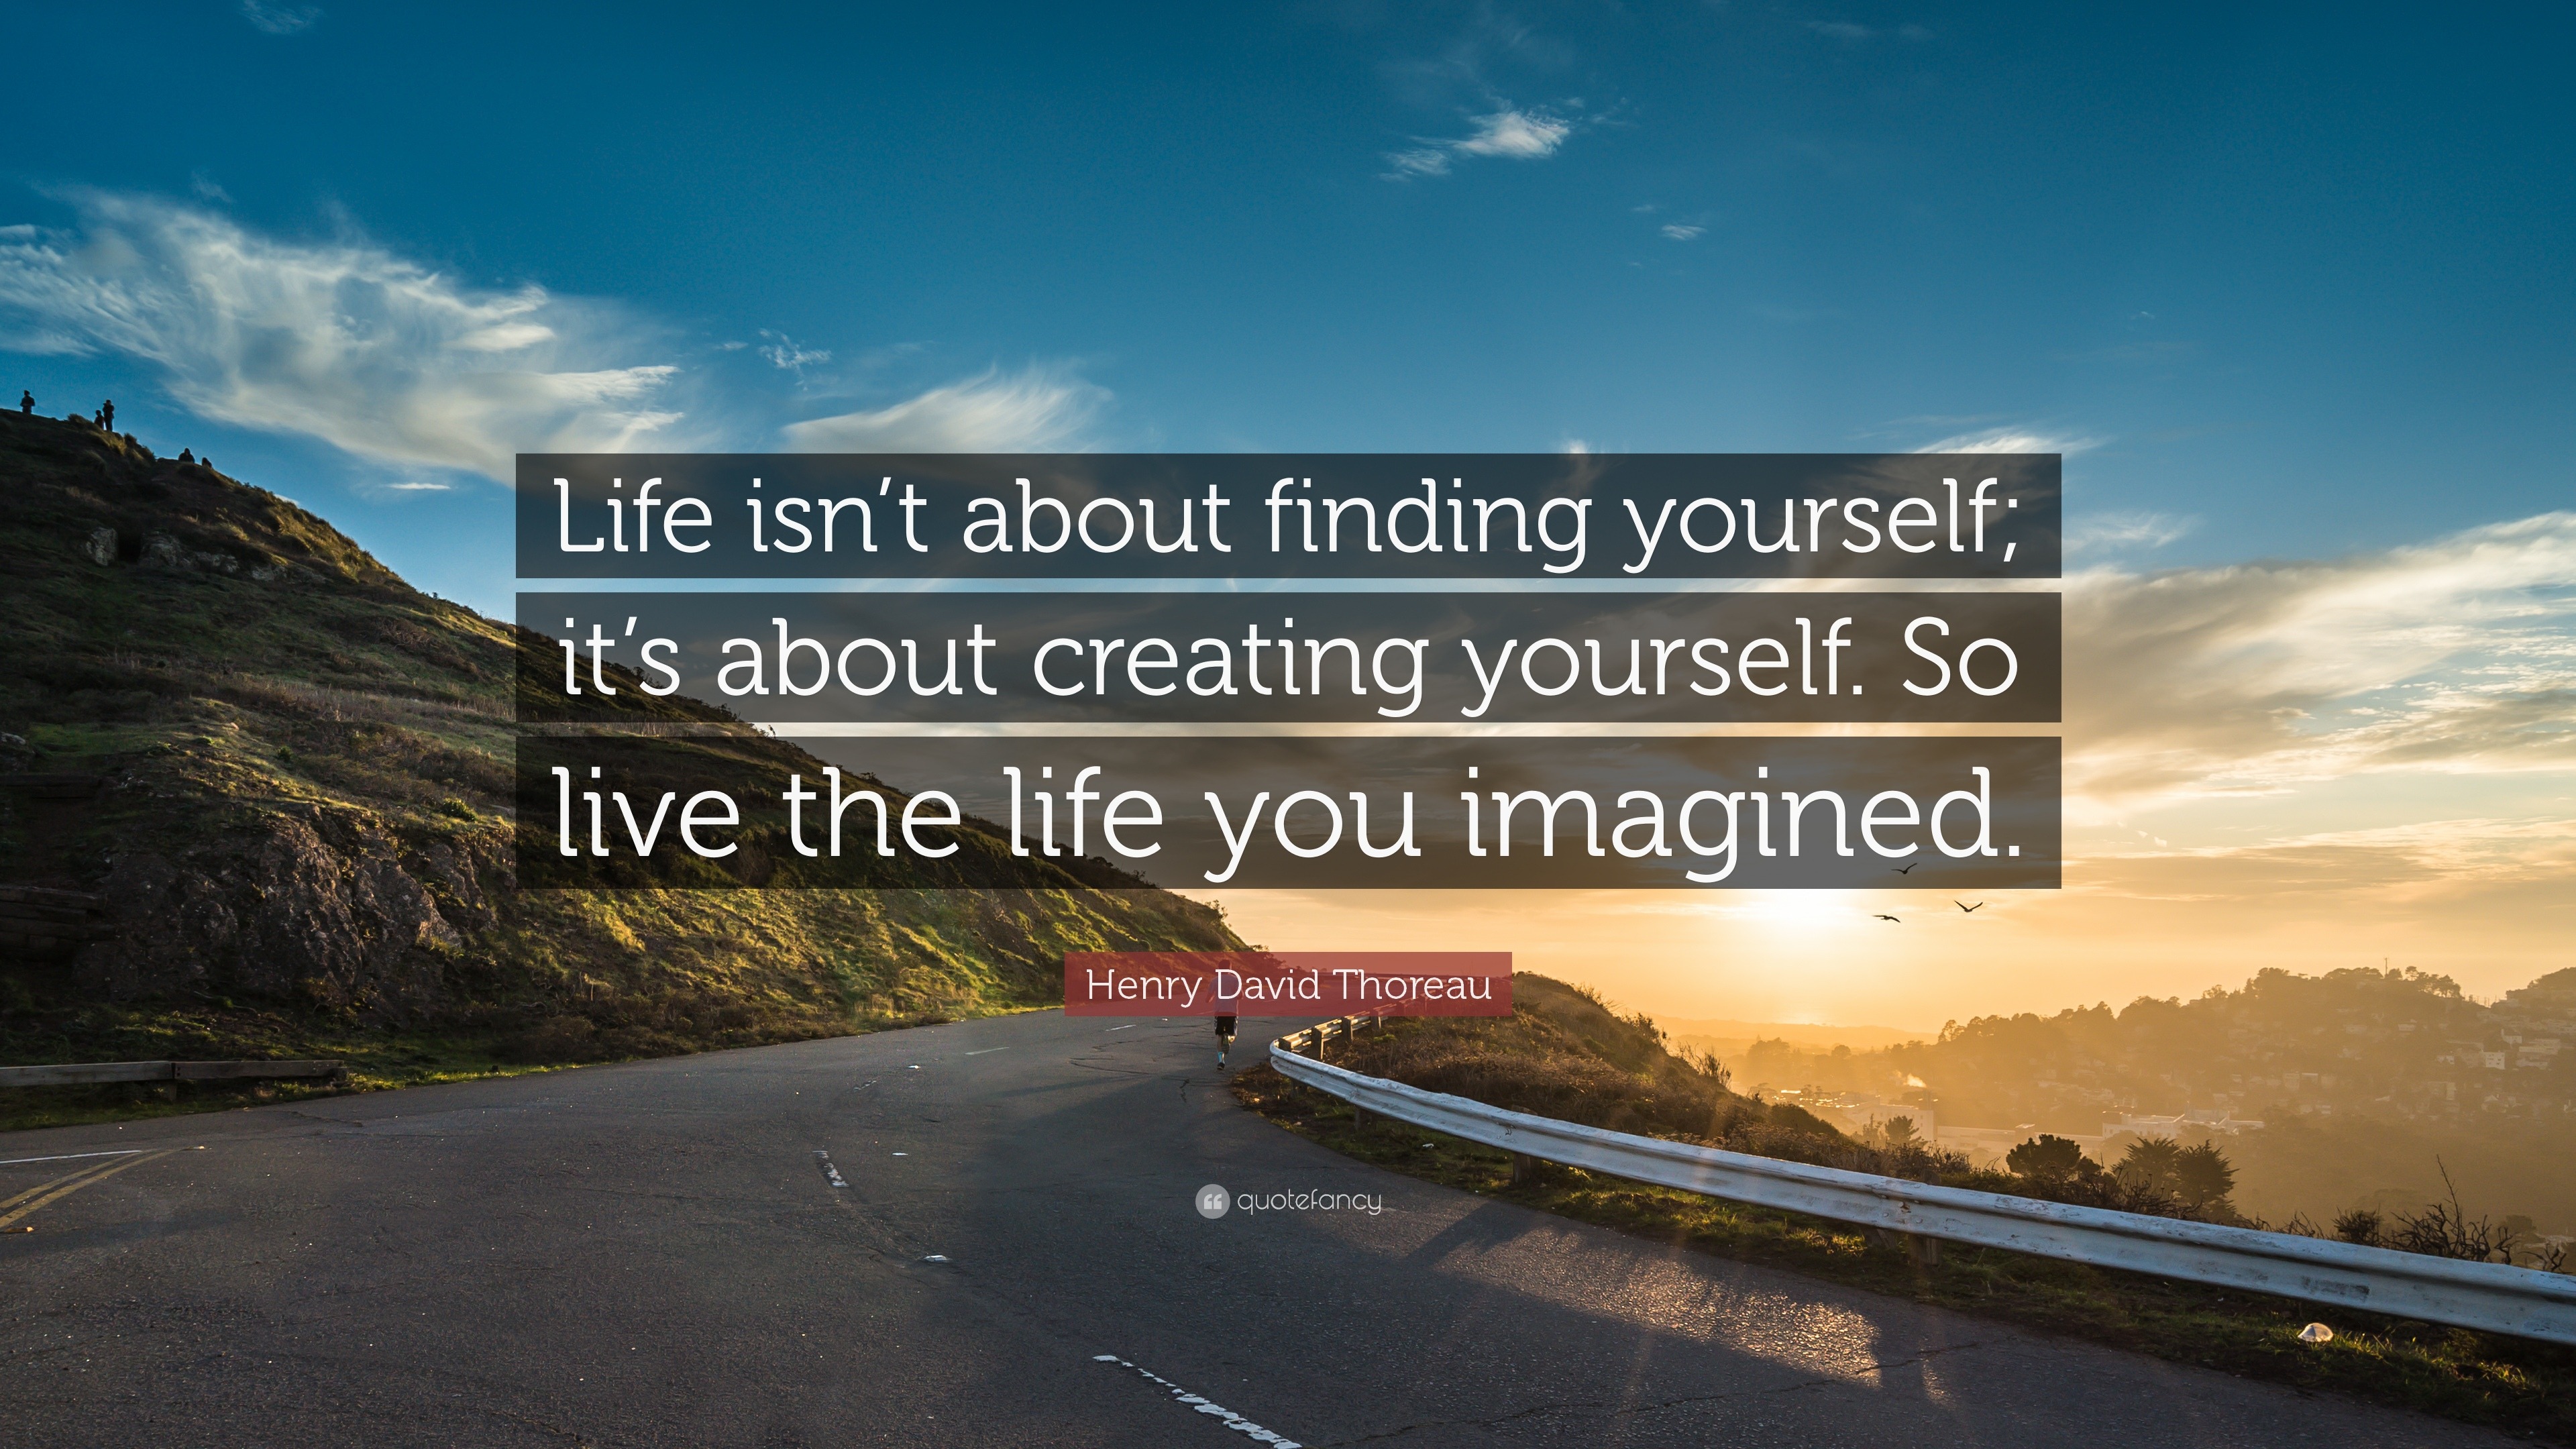 Henry David Thoreau Quote: “Life isn't about finding yourself; it's about  creating yourself. So live